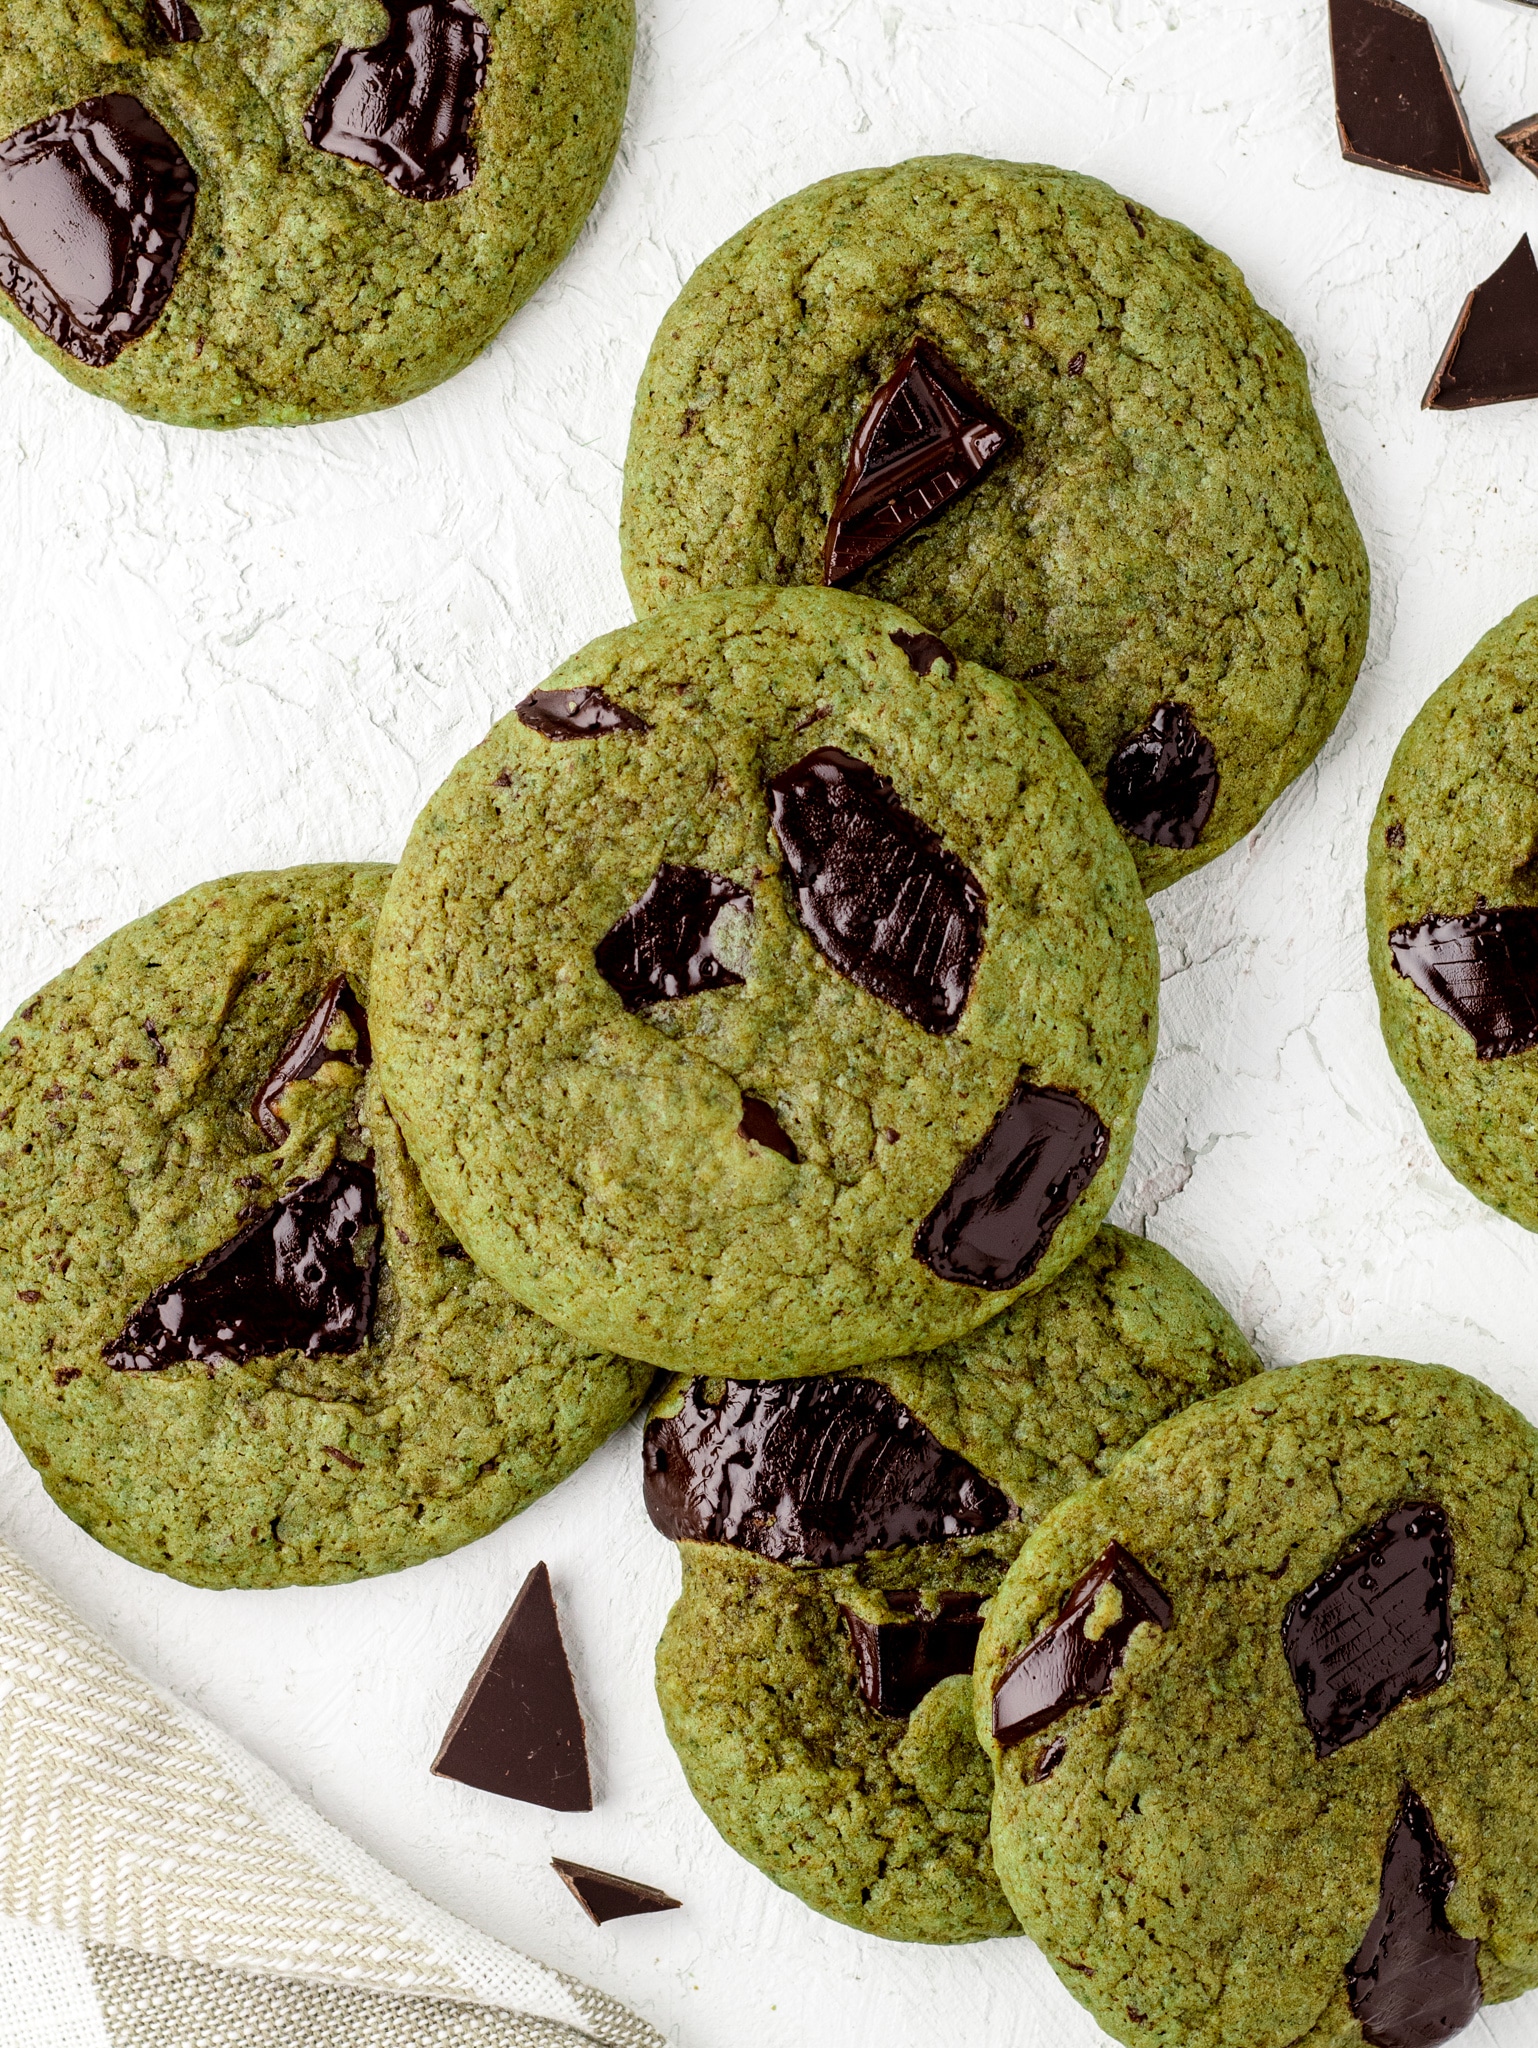 Dark chocolate matcha cookies warm and fresh out of the oven.